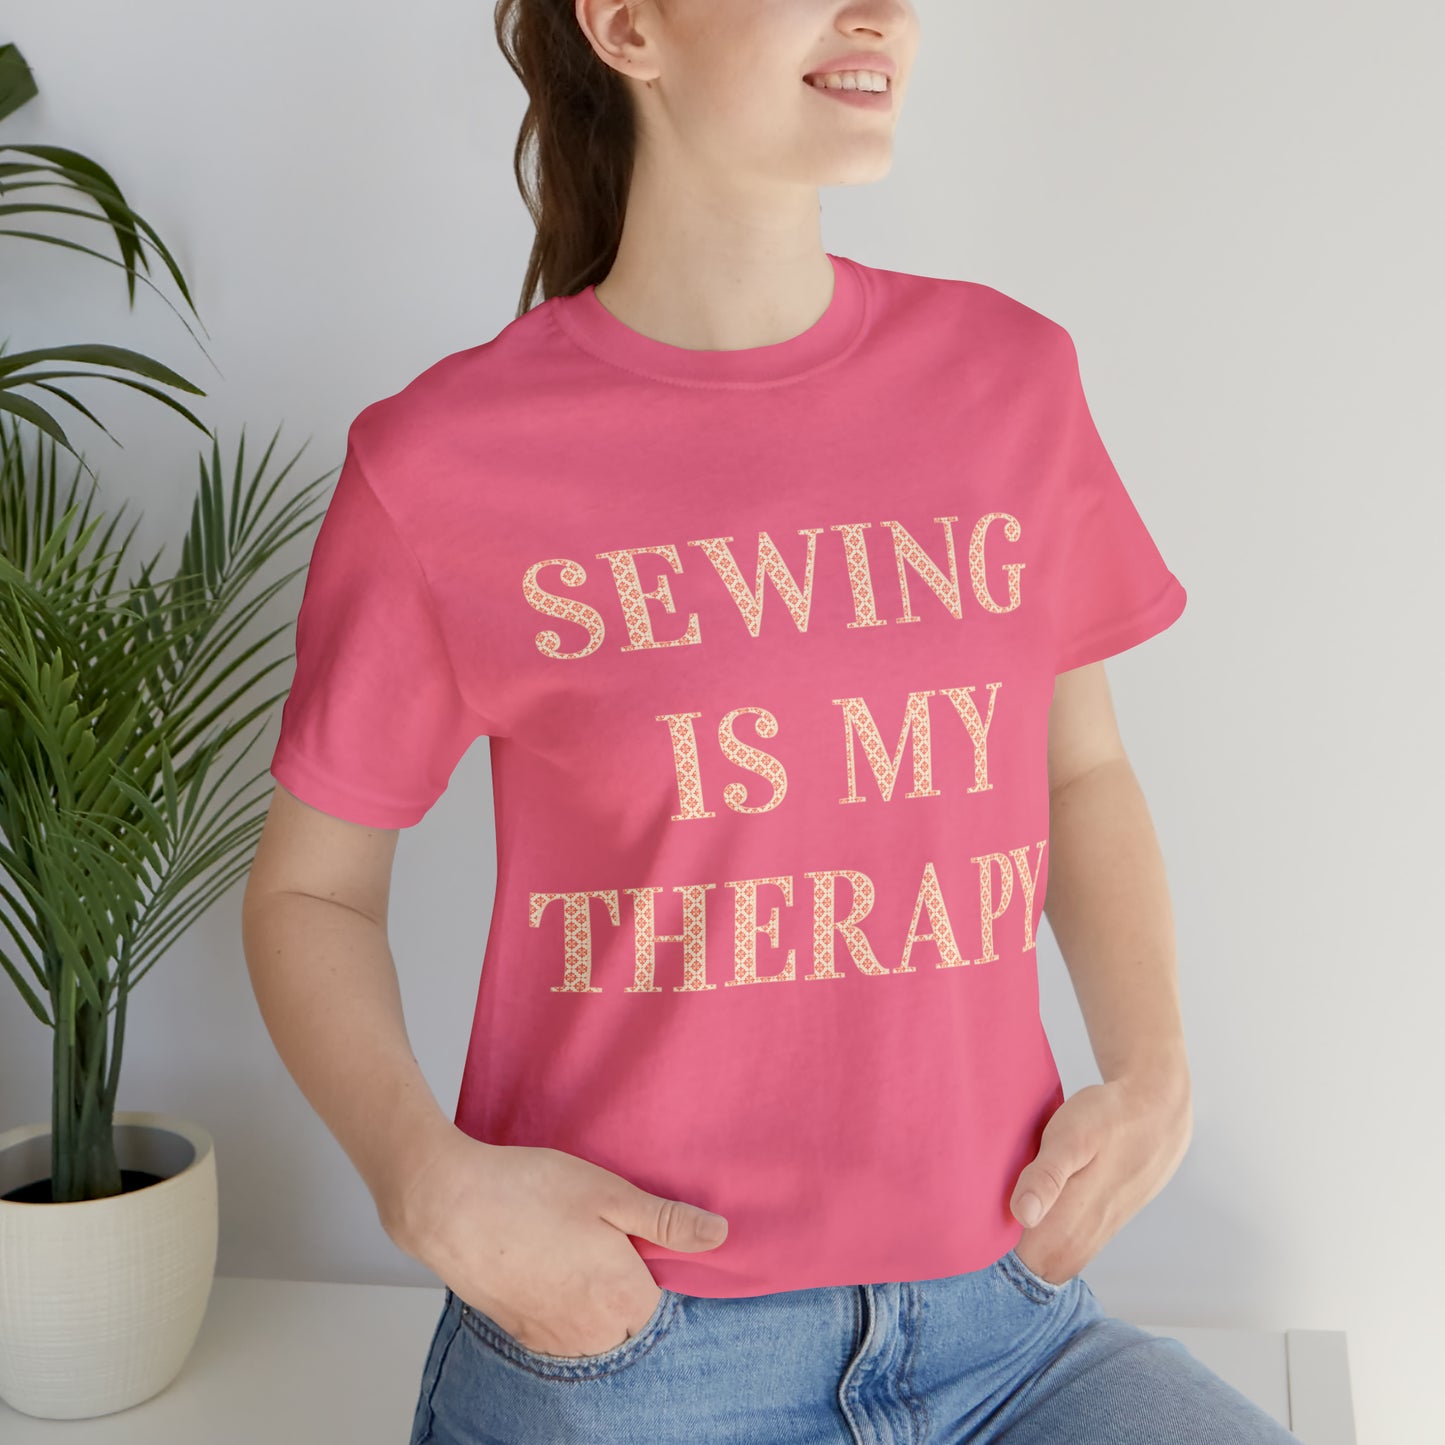 Sewing Is My Therapy- Adult, Regular Fit, Soft Cotton, T-shirt